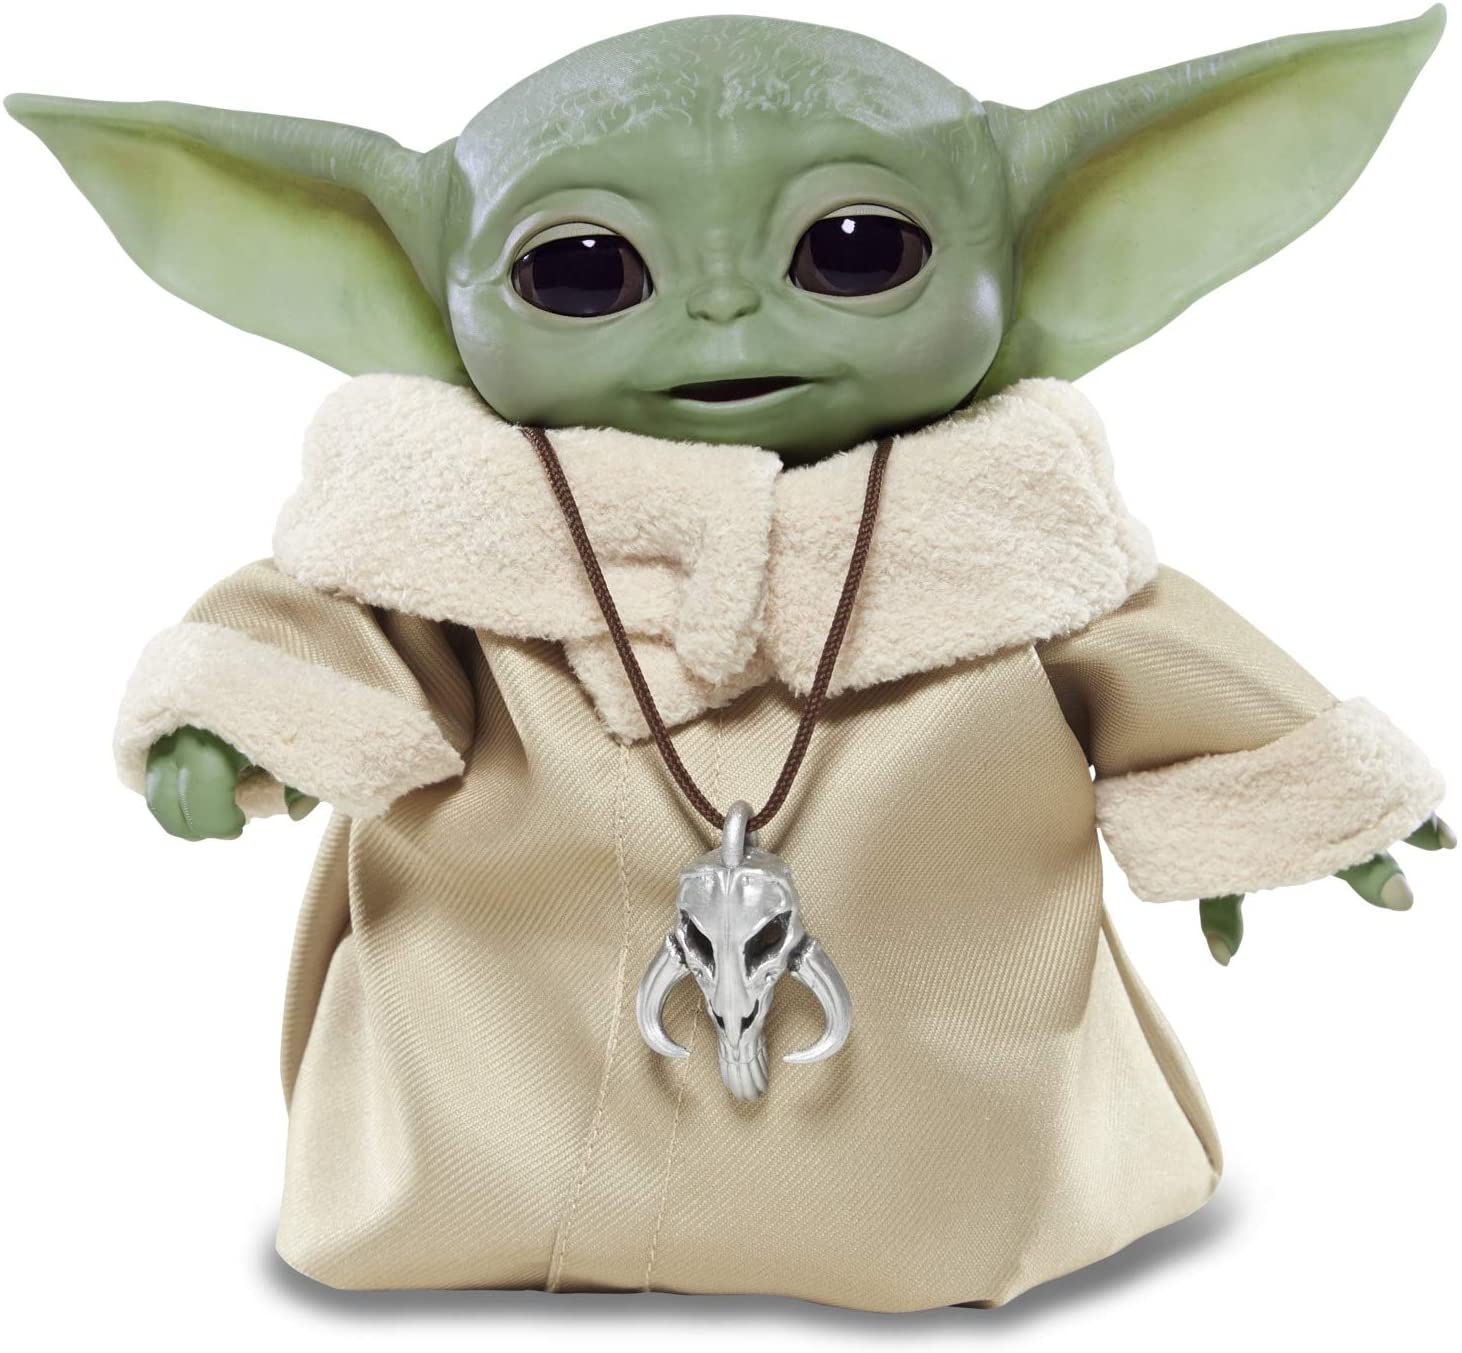 Star Wars Baby Yoda toy -best price deal- now $79(was $106.99 save 26%) + free delivery